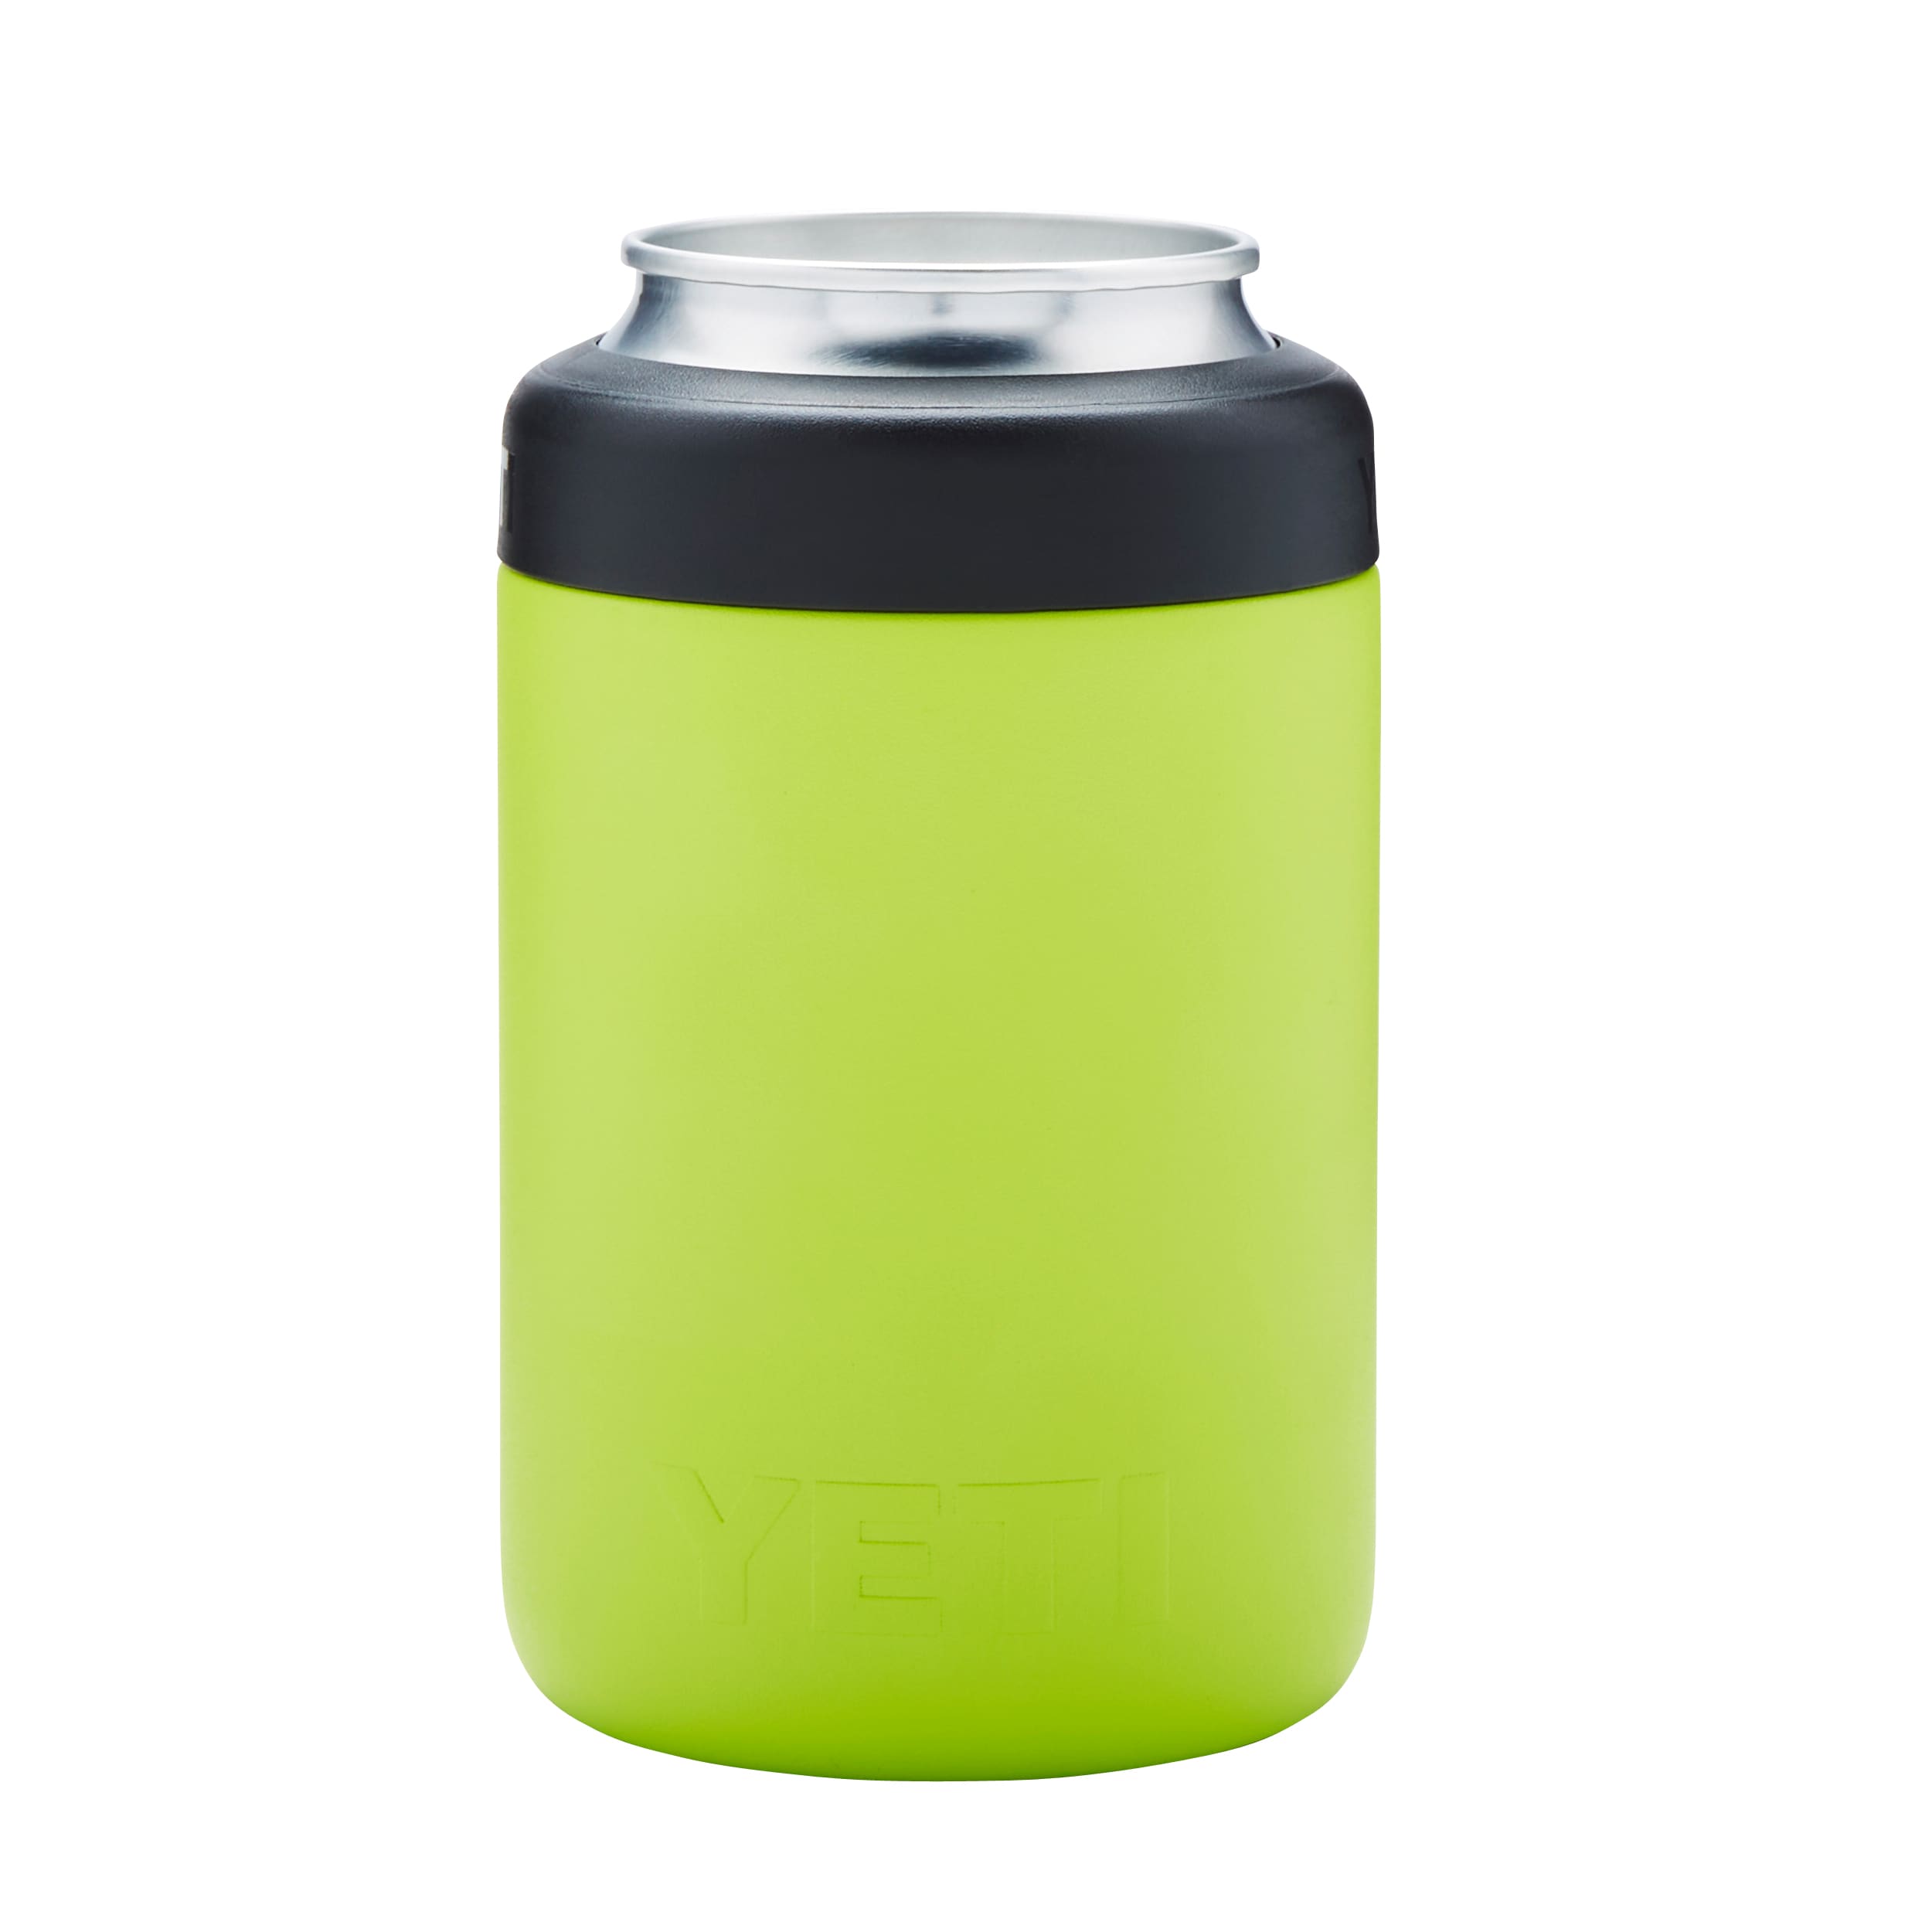 YETI - Now Available: Chartreuse. A new can't-miss color inspired